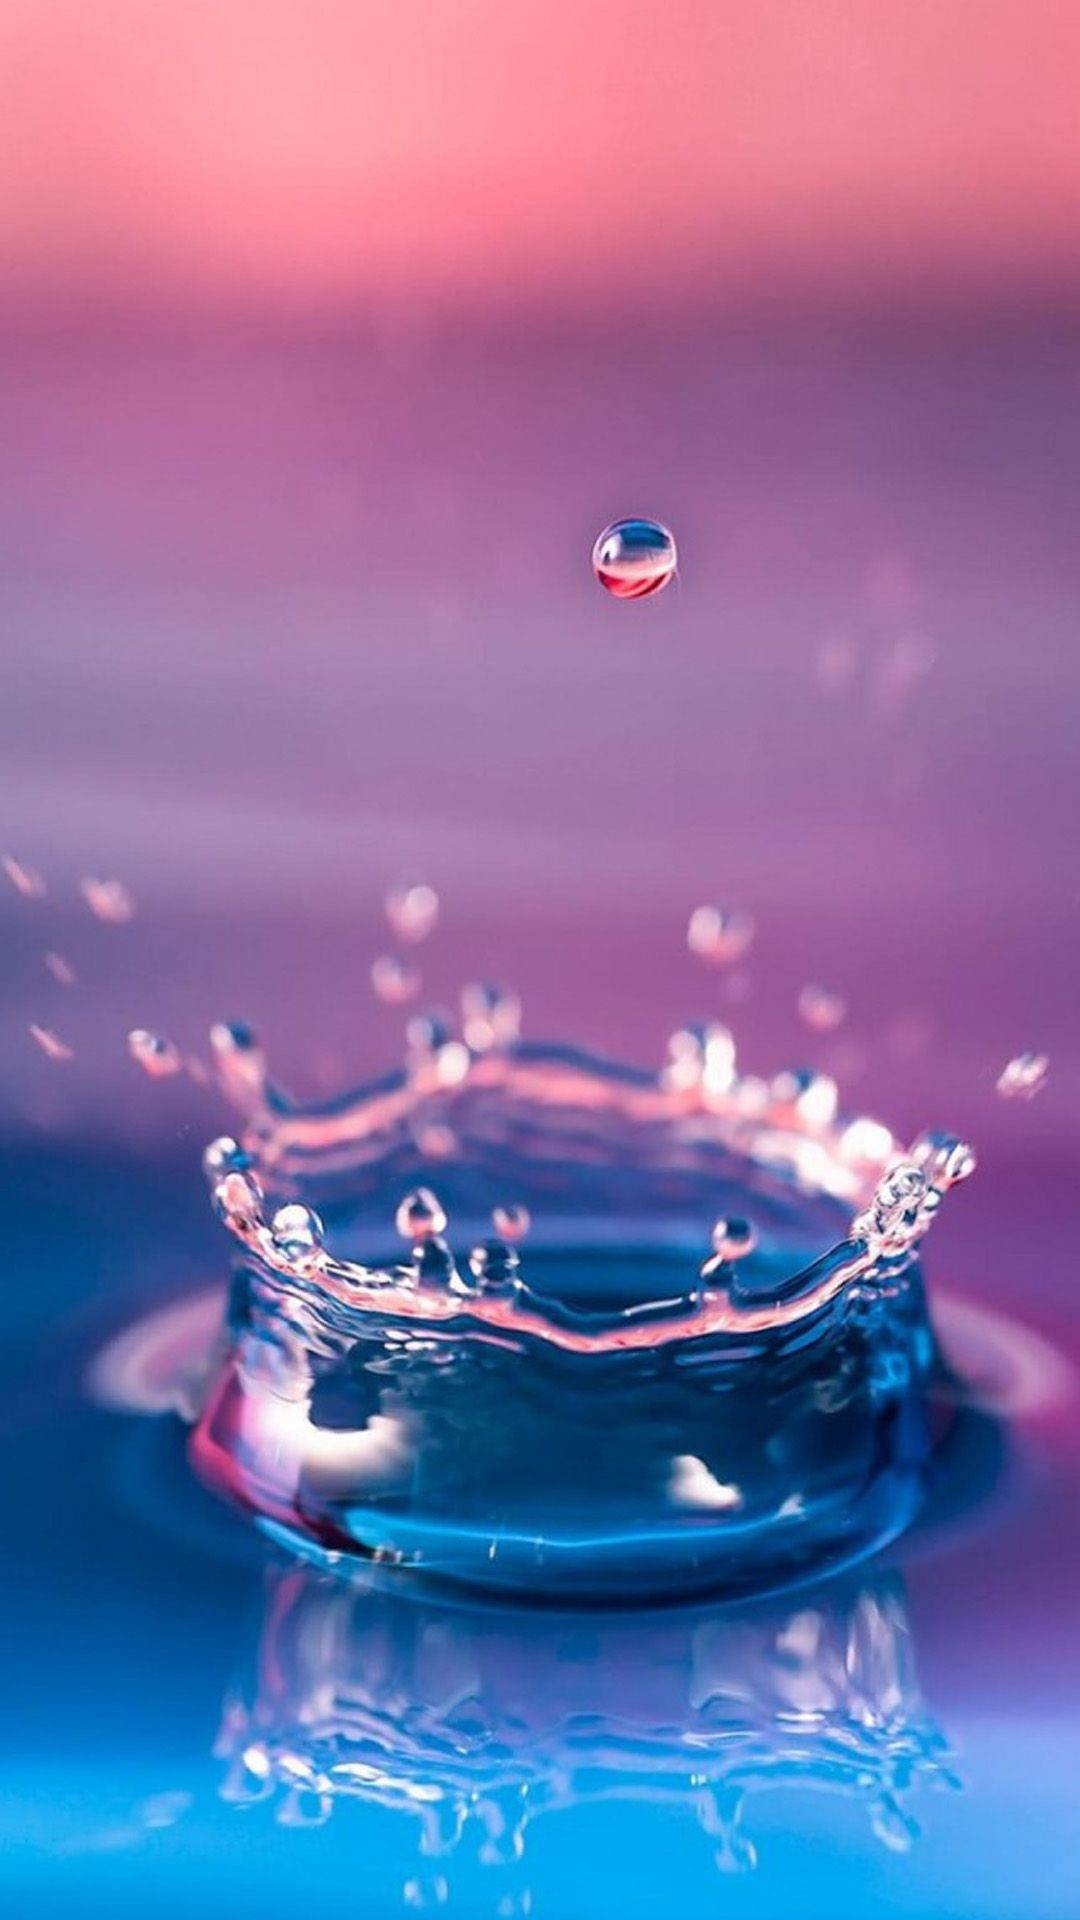 1080x1920 Free Download Samsung Galaxy S5 Wallpaper with Water Drop Picture HD Wallpapers | Wallpapers Download | High Resolution Wallpapers | S5 wallpaper, Hd nature wallpapers, Galaxy wallpaper